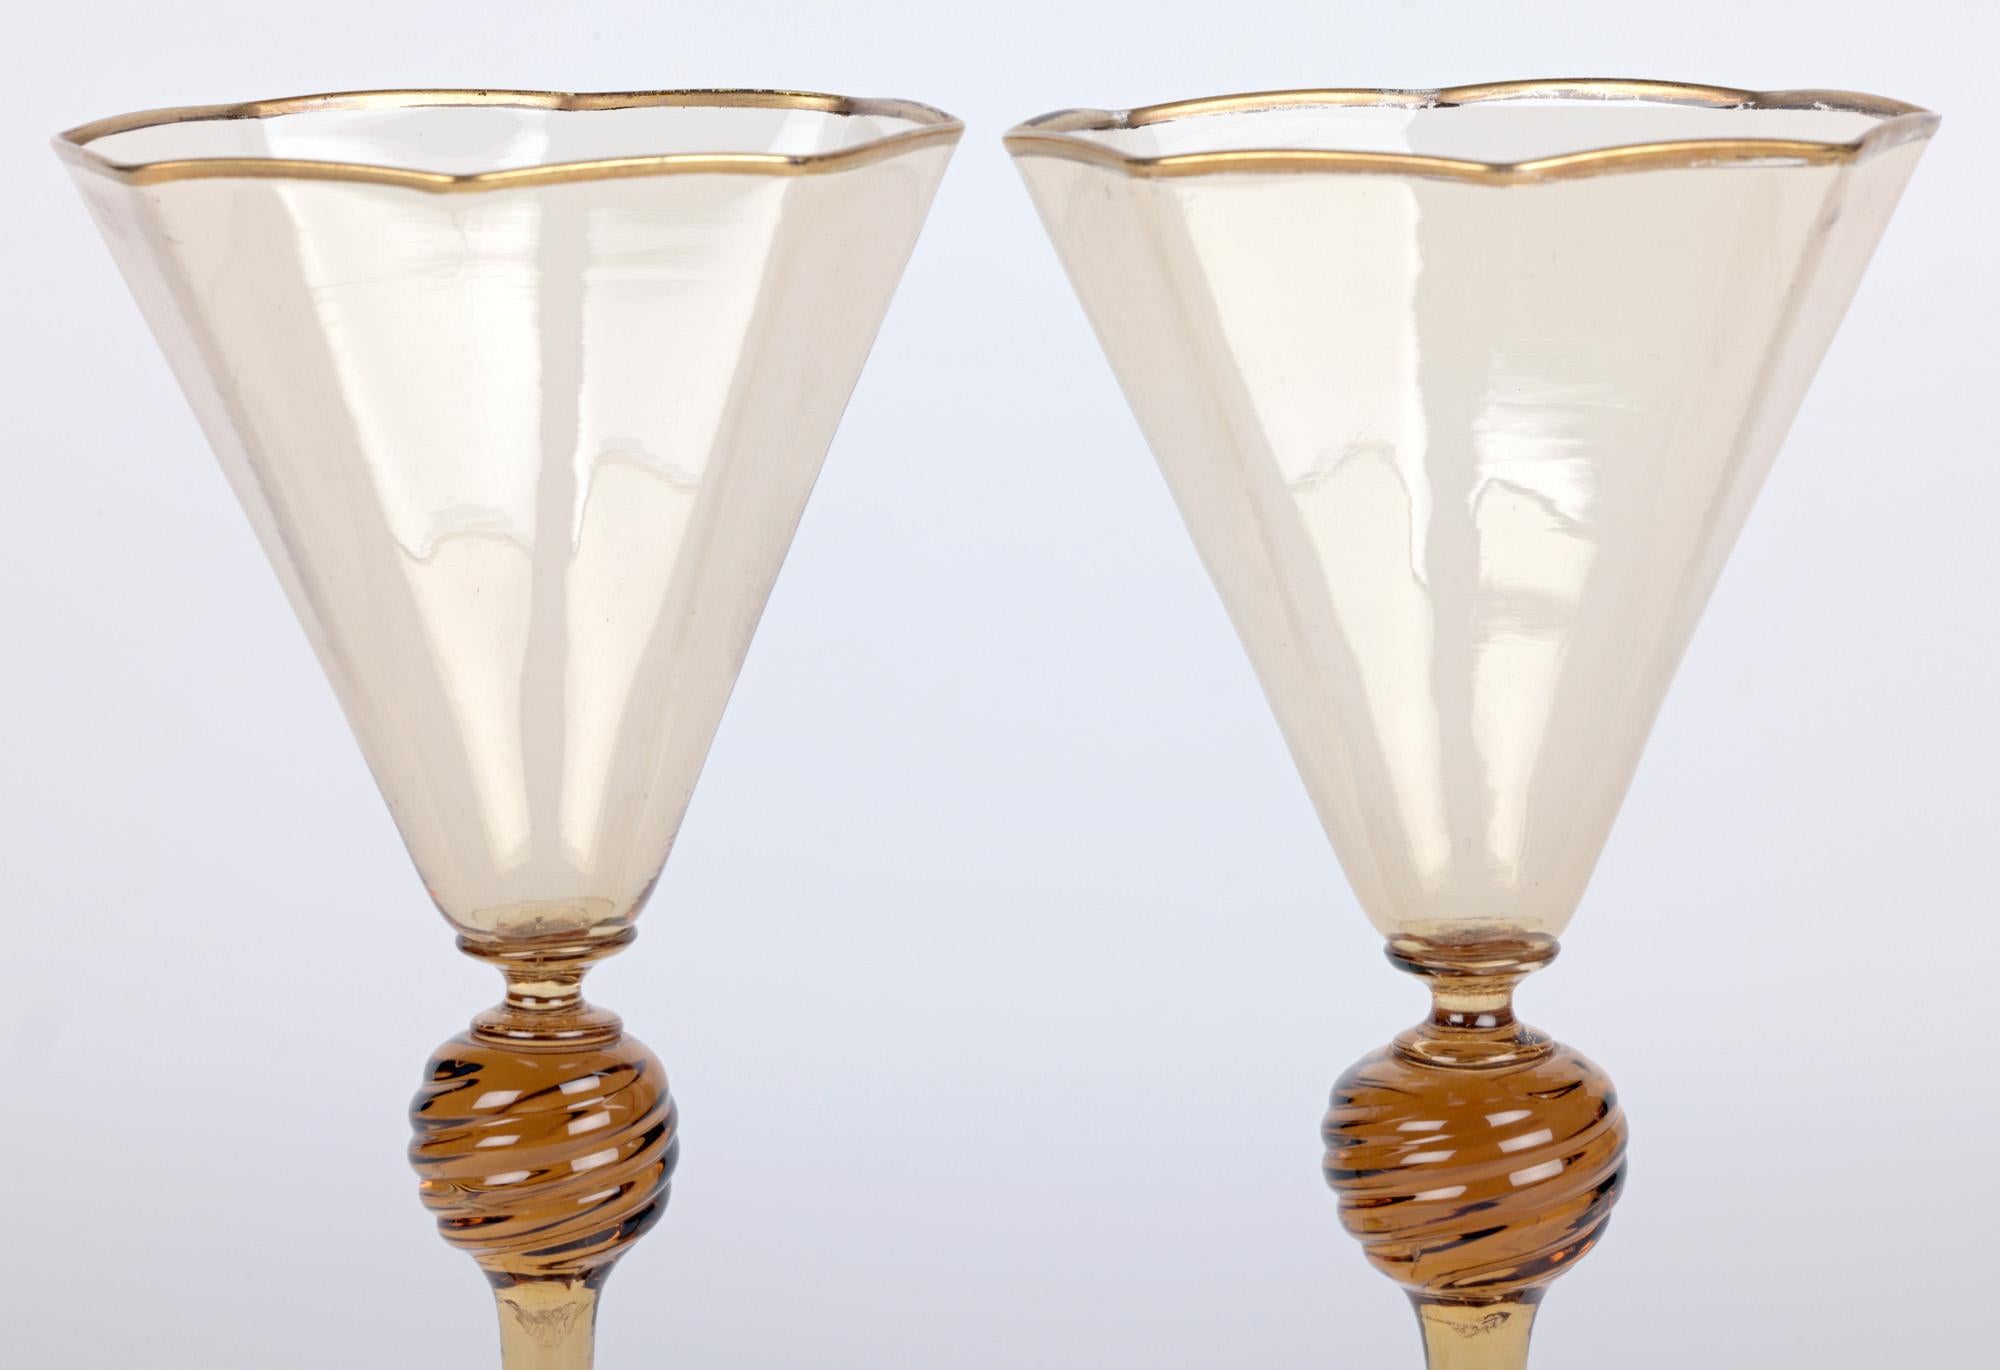 A very fine pair Murano MVM Cappellin amber wine glasses dating from around 1925. The glasses have octagonal bowls with gilded edging mounted on large wrythen knopped stems and spreading circular feet with gilded edging. The glasses are not